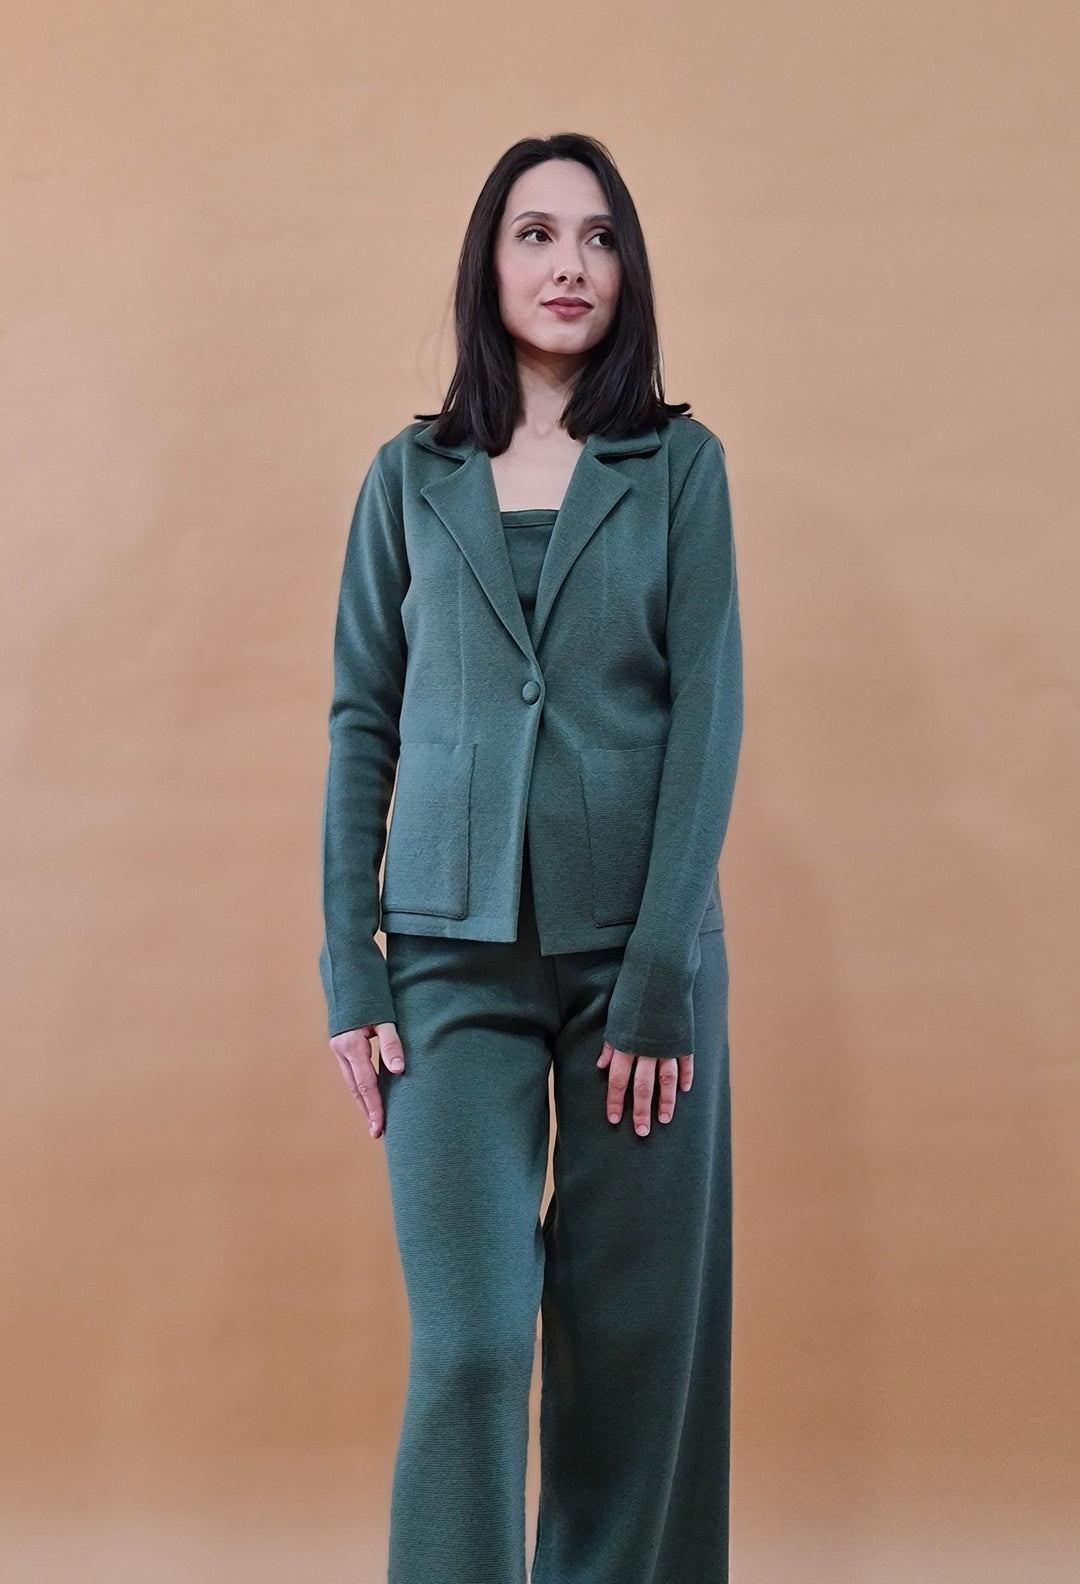 Woman wearing a green pantsuit against a beige background